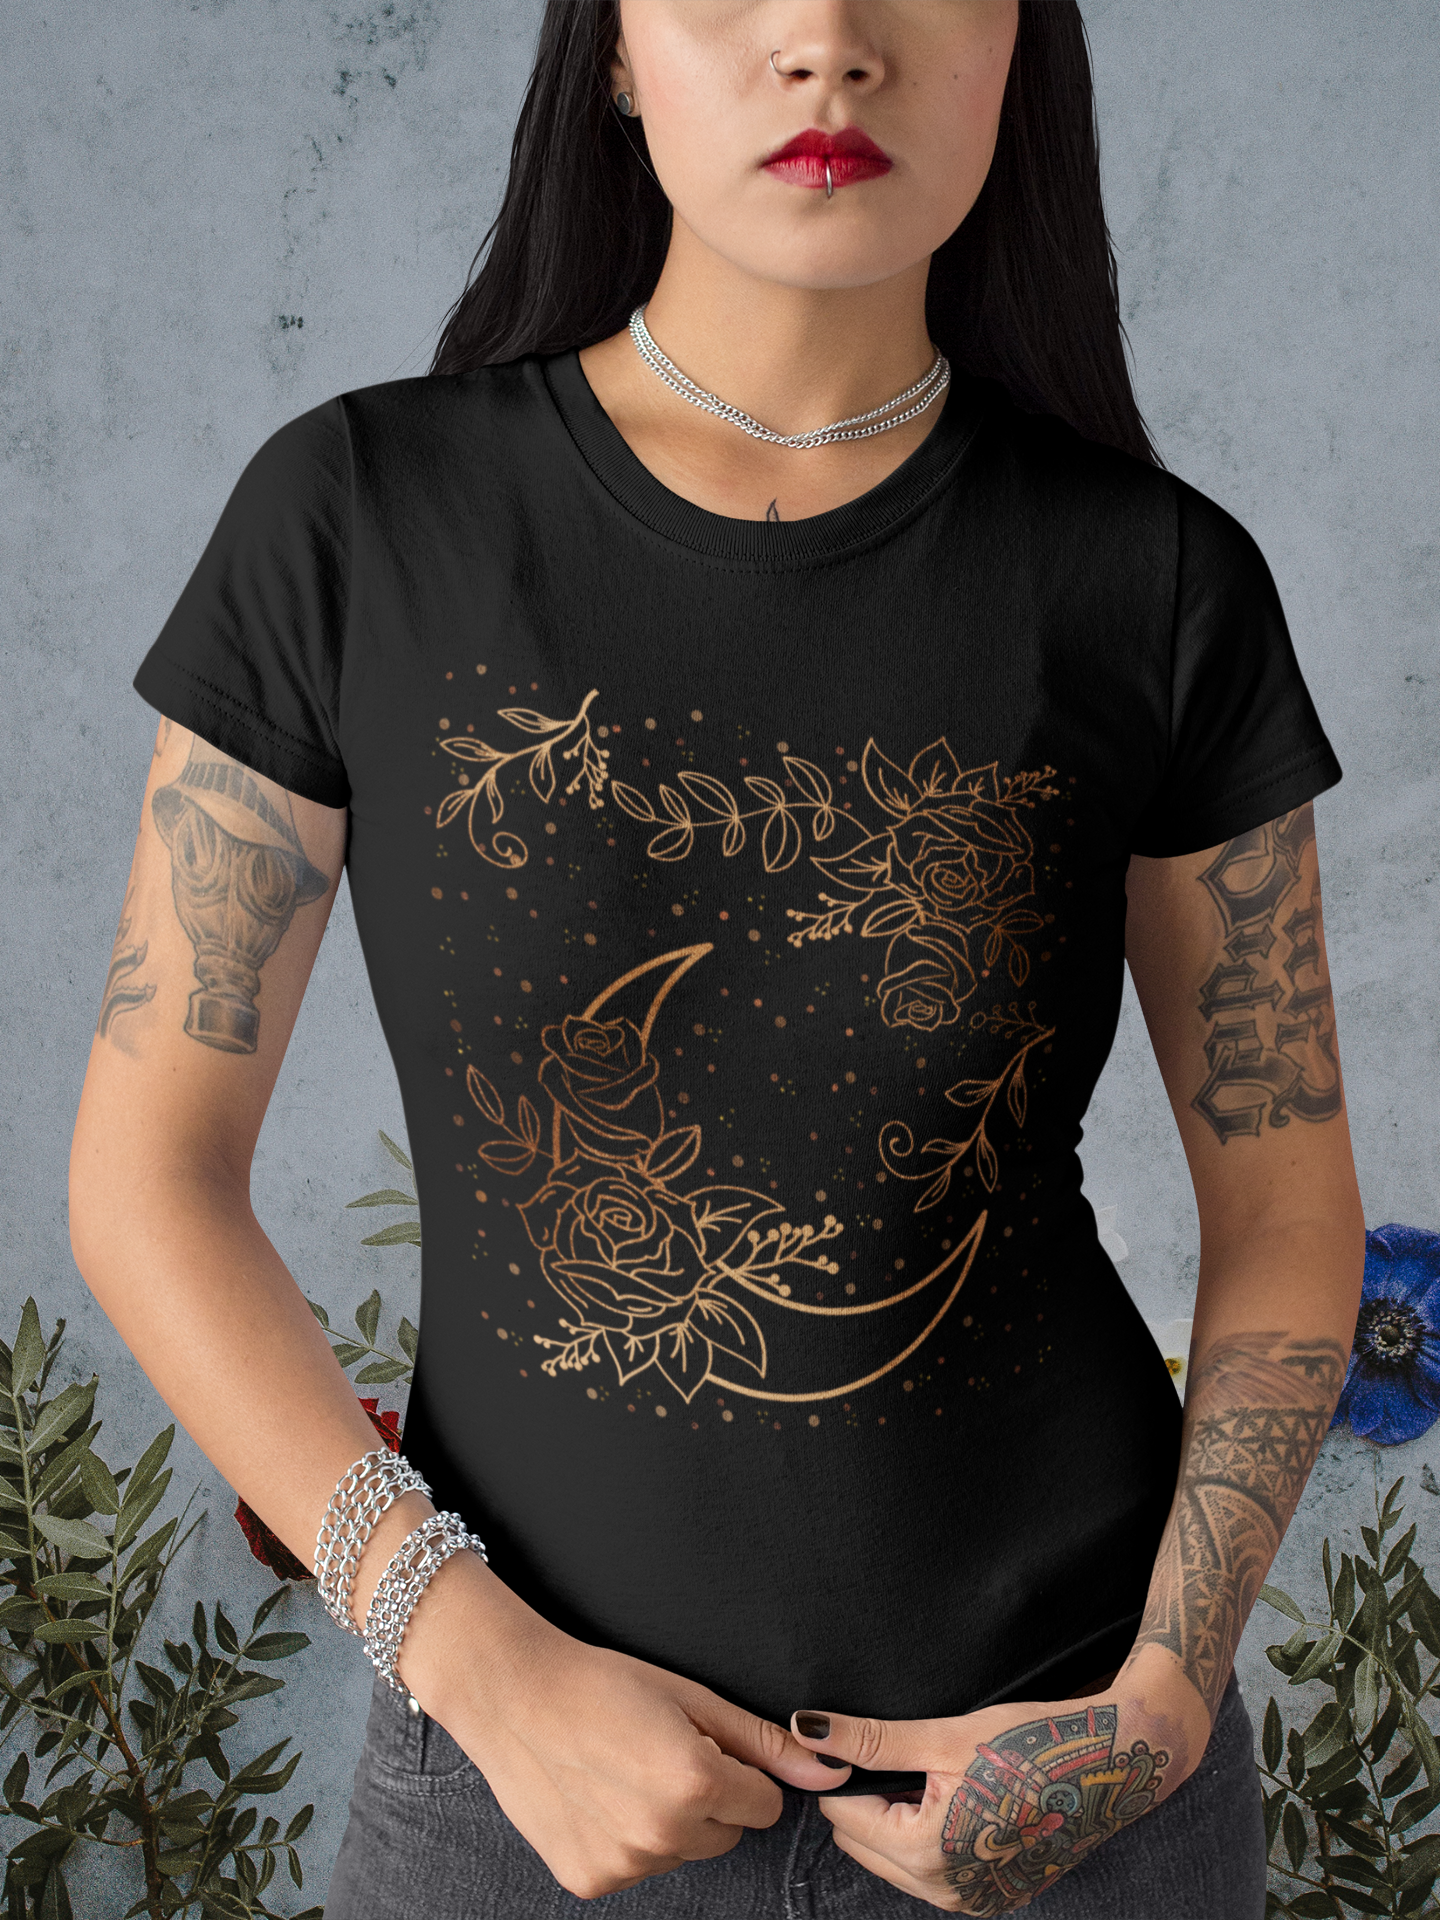 witchy crescent moon floral tee shirt